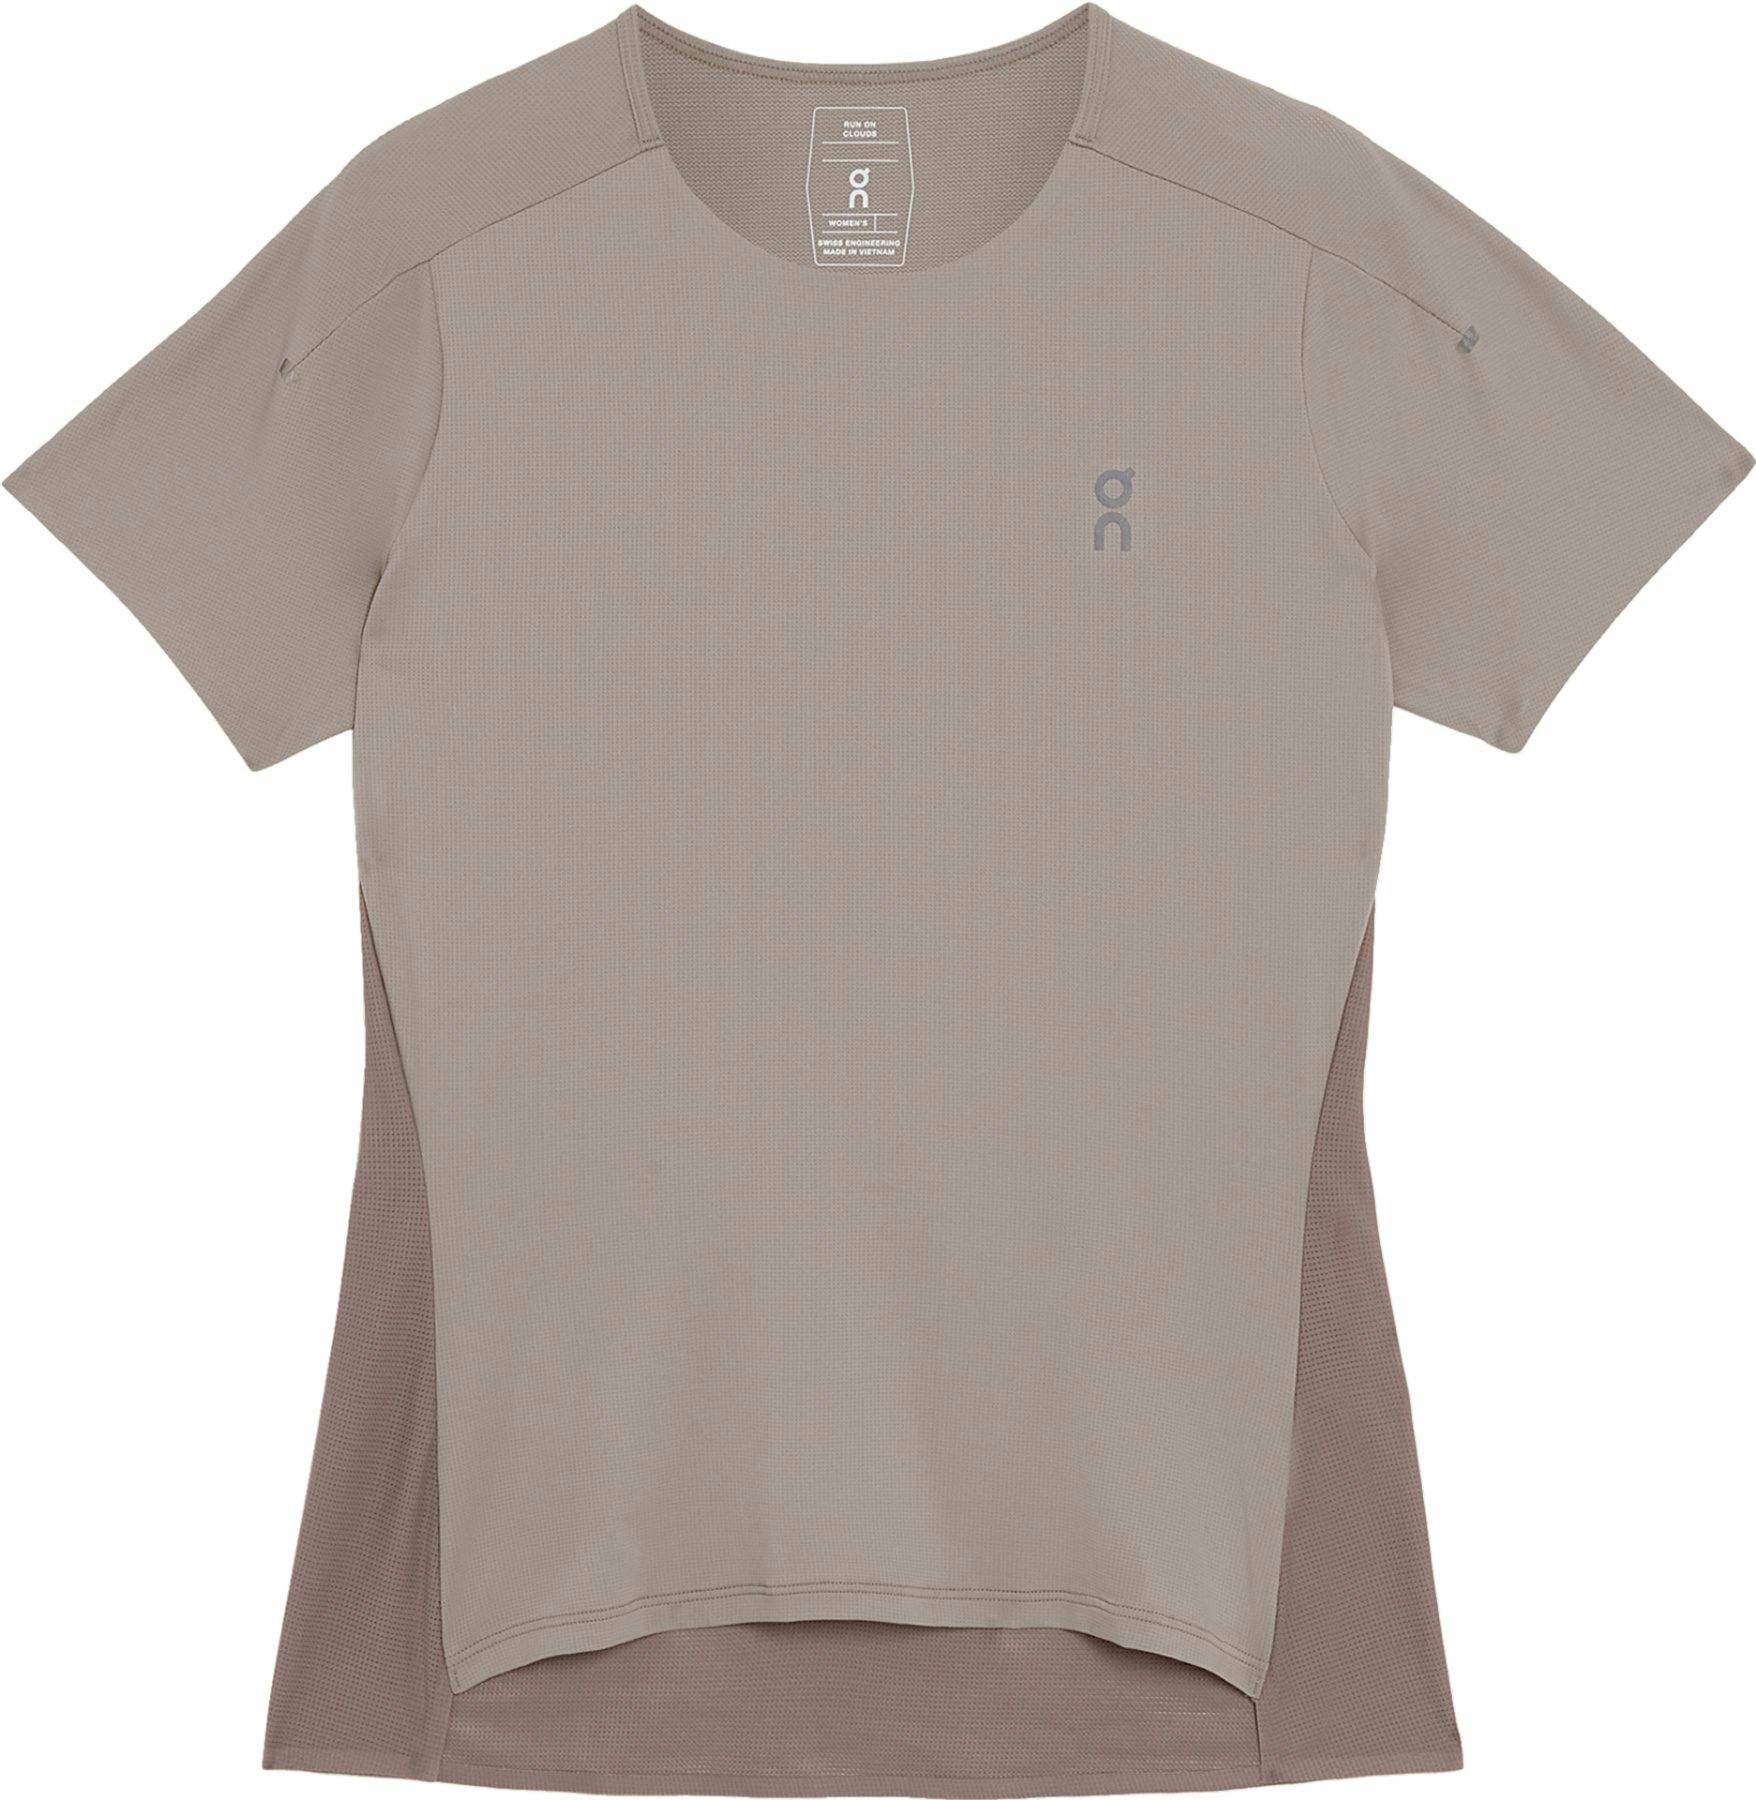 Product image for Performance-T Running T-Shirt - Women's